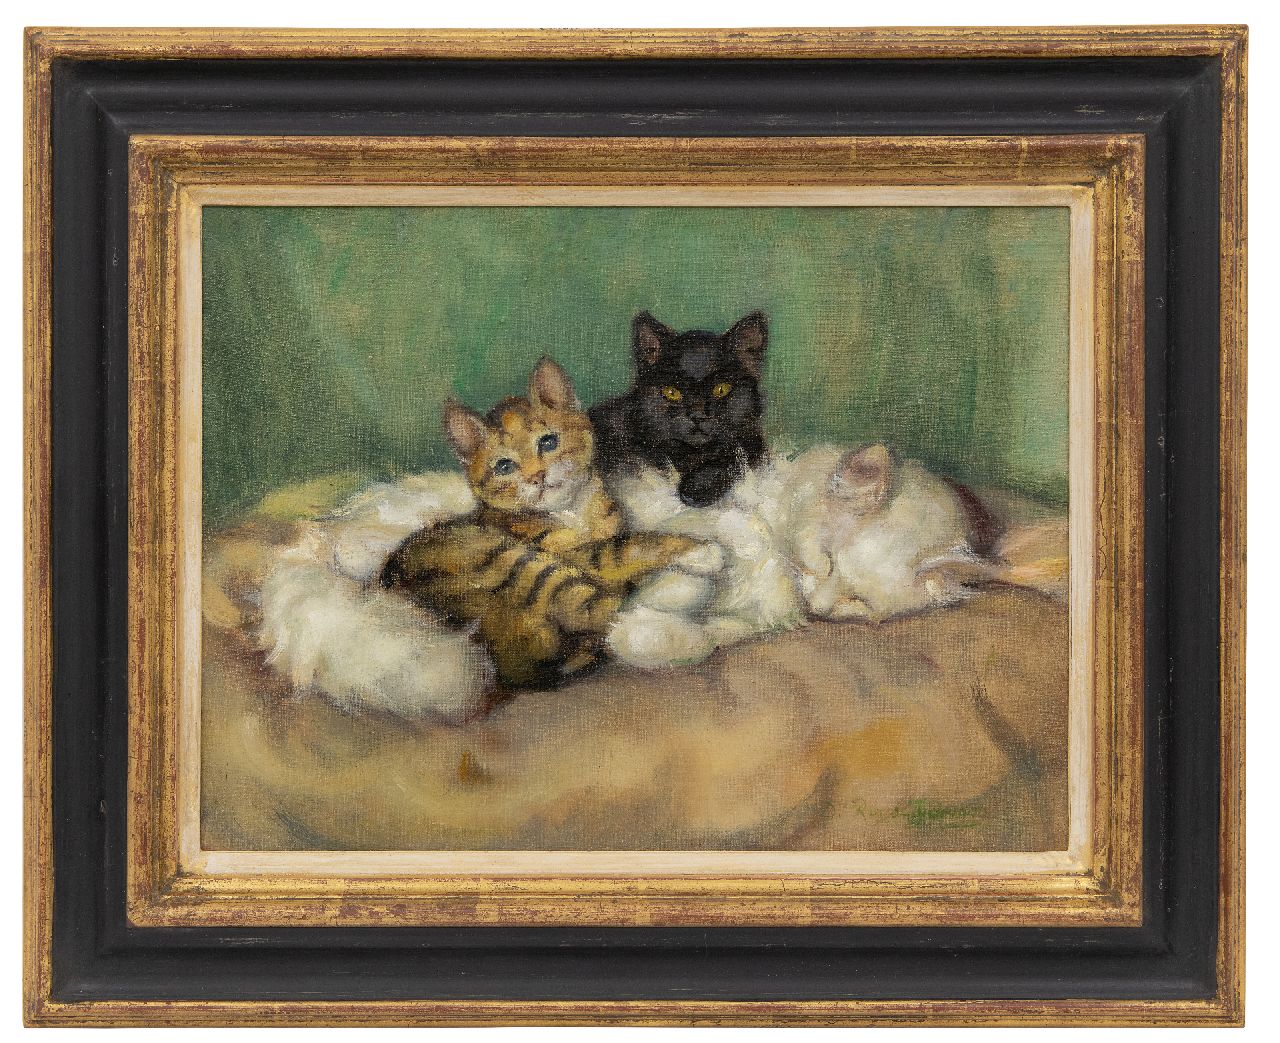 Tijdeman E.M.  | Ernestine Marie 'Dé' Tijdeman | Paintings offered for sale | Mother and two kittens, oil on canvas 30.5 x 40.5 cm, signed l.r.